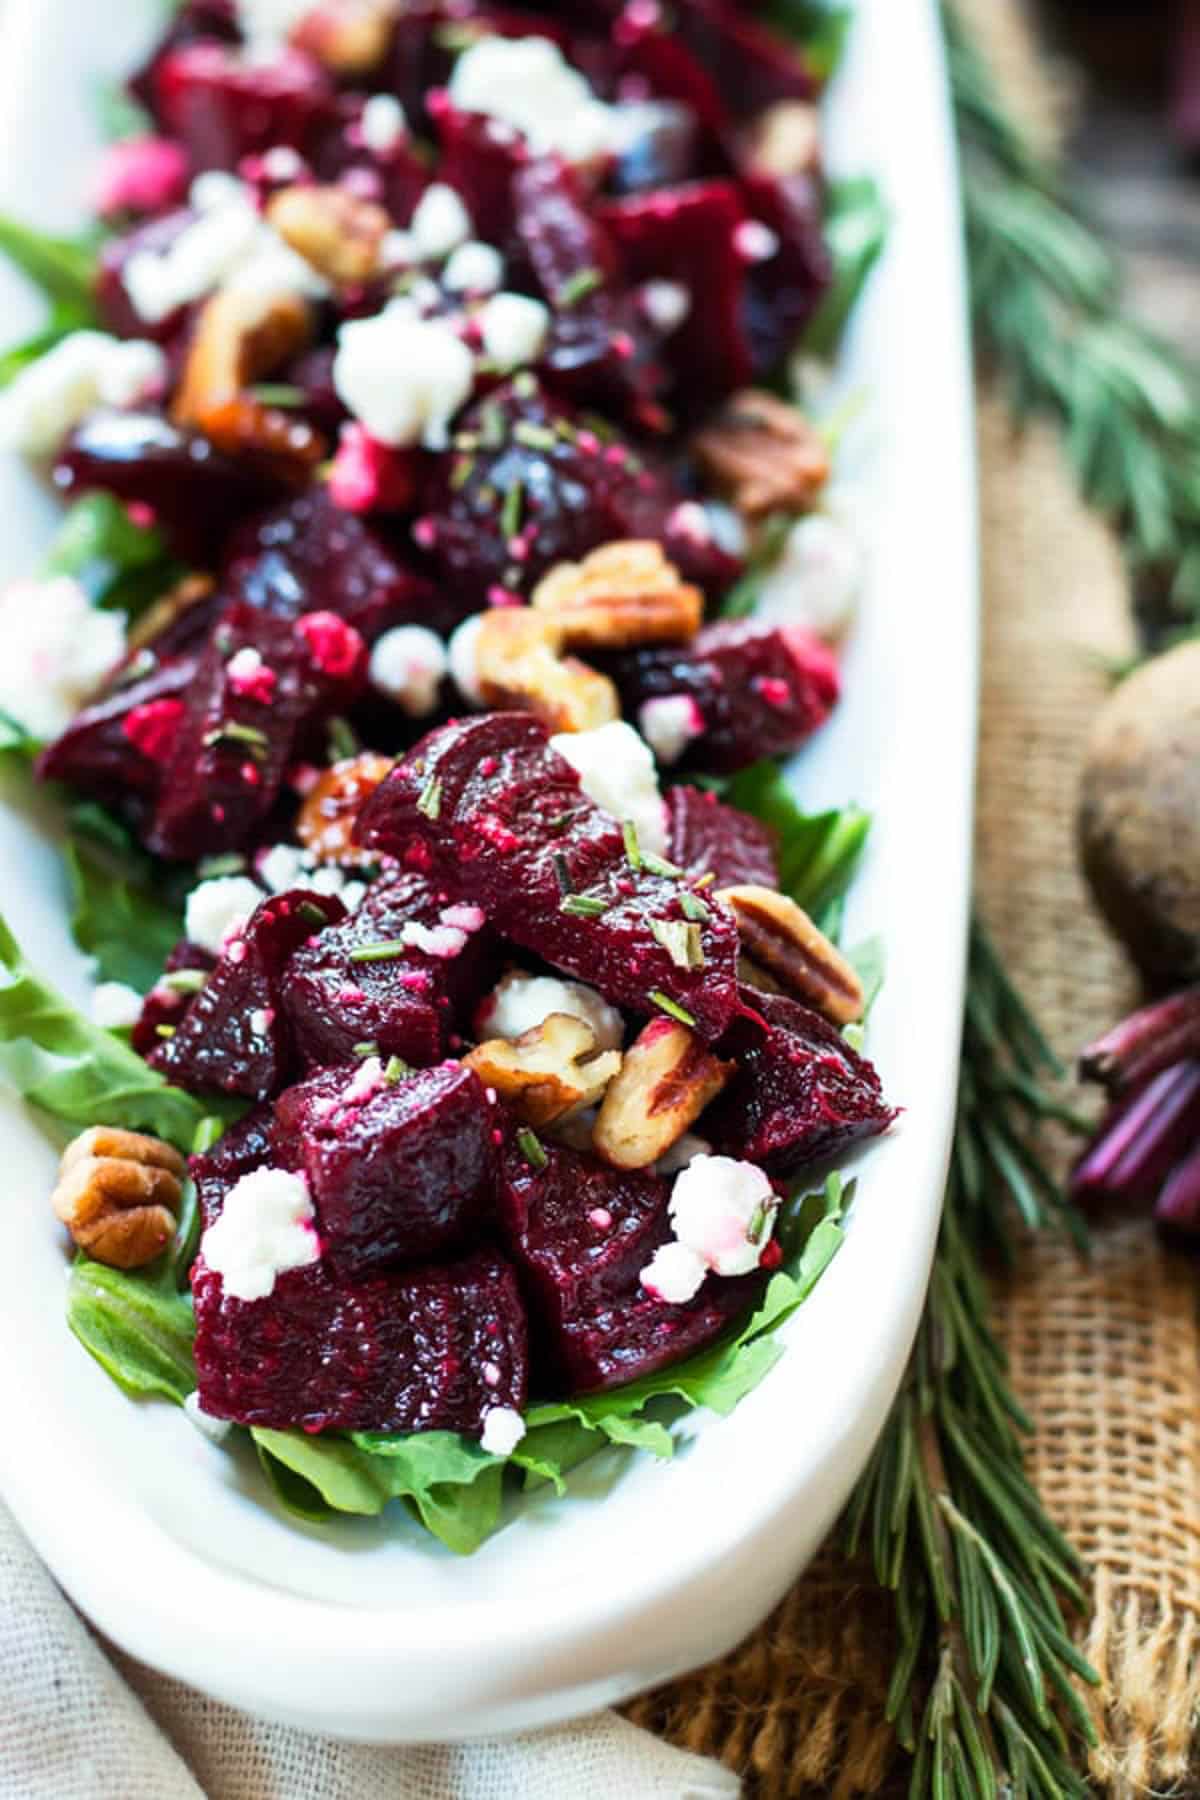 A tray filled with roasted beets, goat cheese, and pecans for an easy holiday side dish.